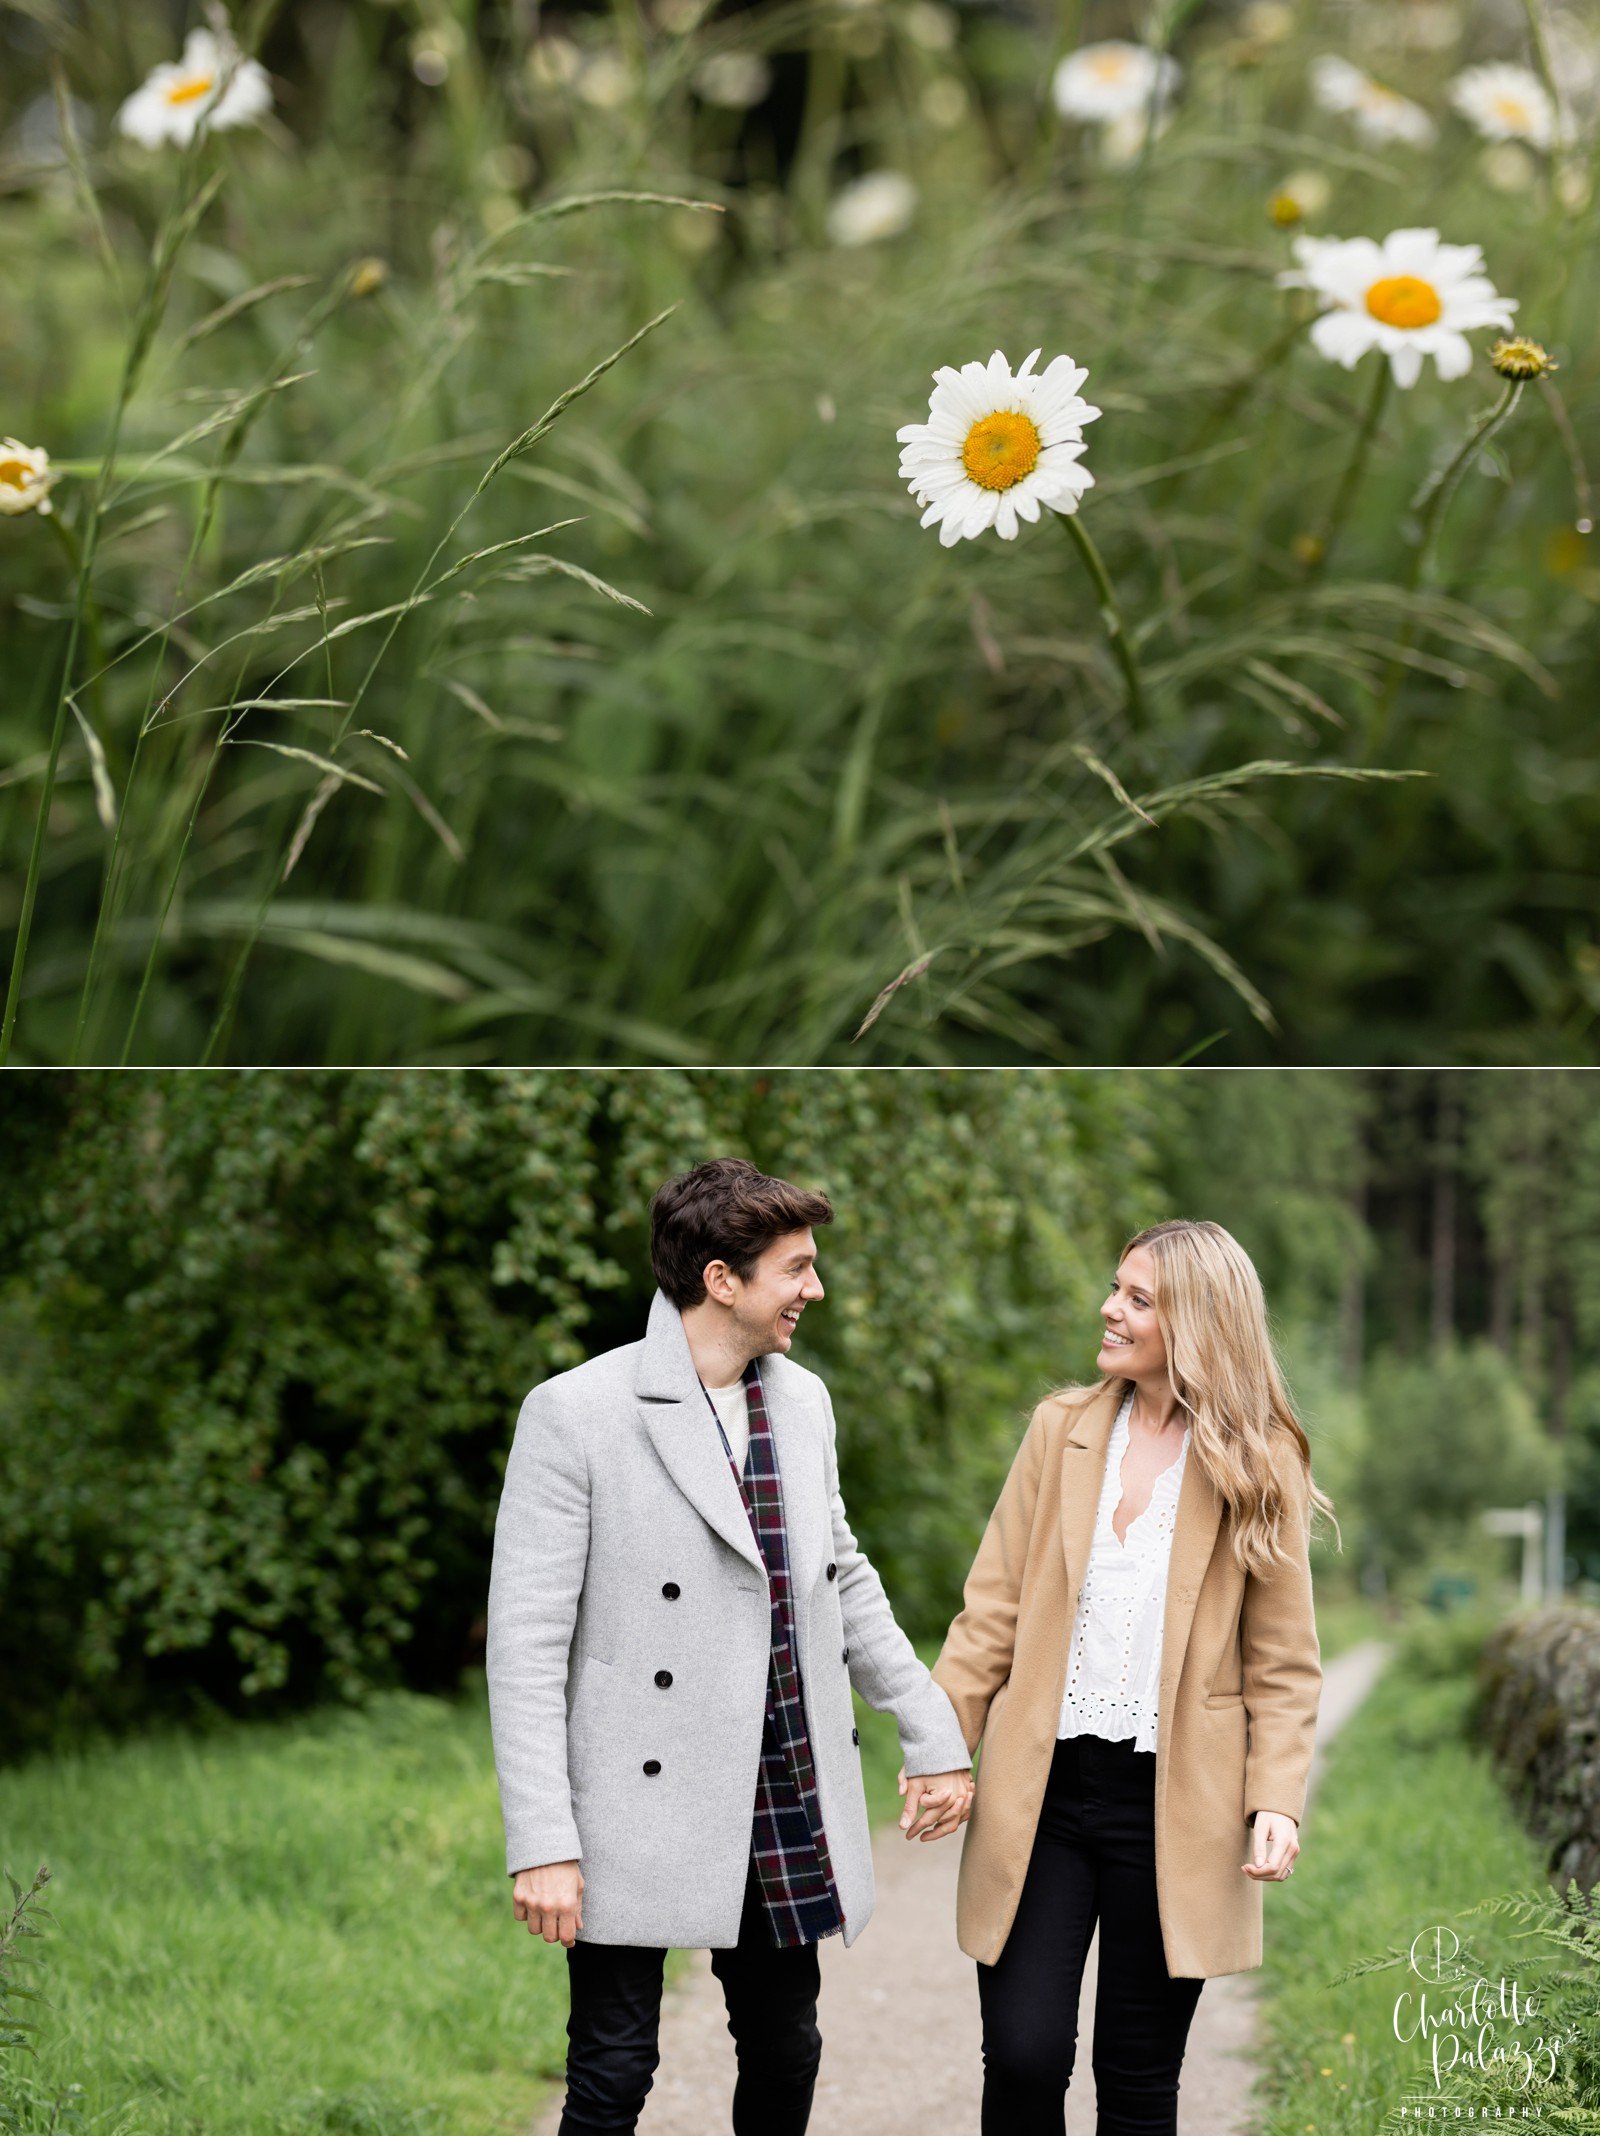 Holly_James_Engagement_session_Macclesfield_Forest_Cheshire_Wedding_Photographer_0004.jpg